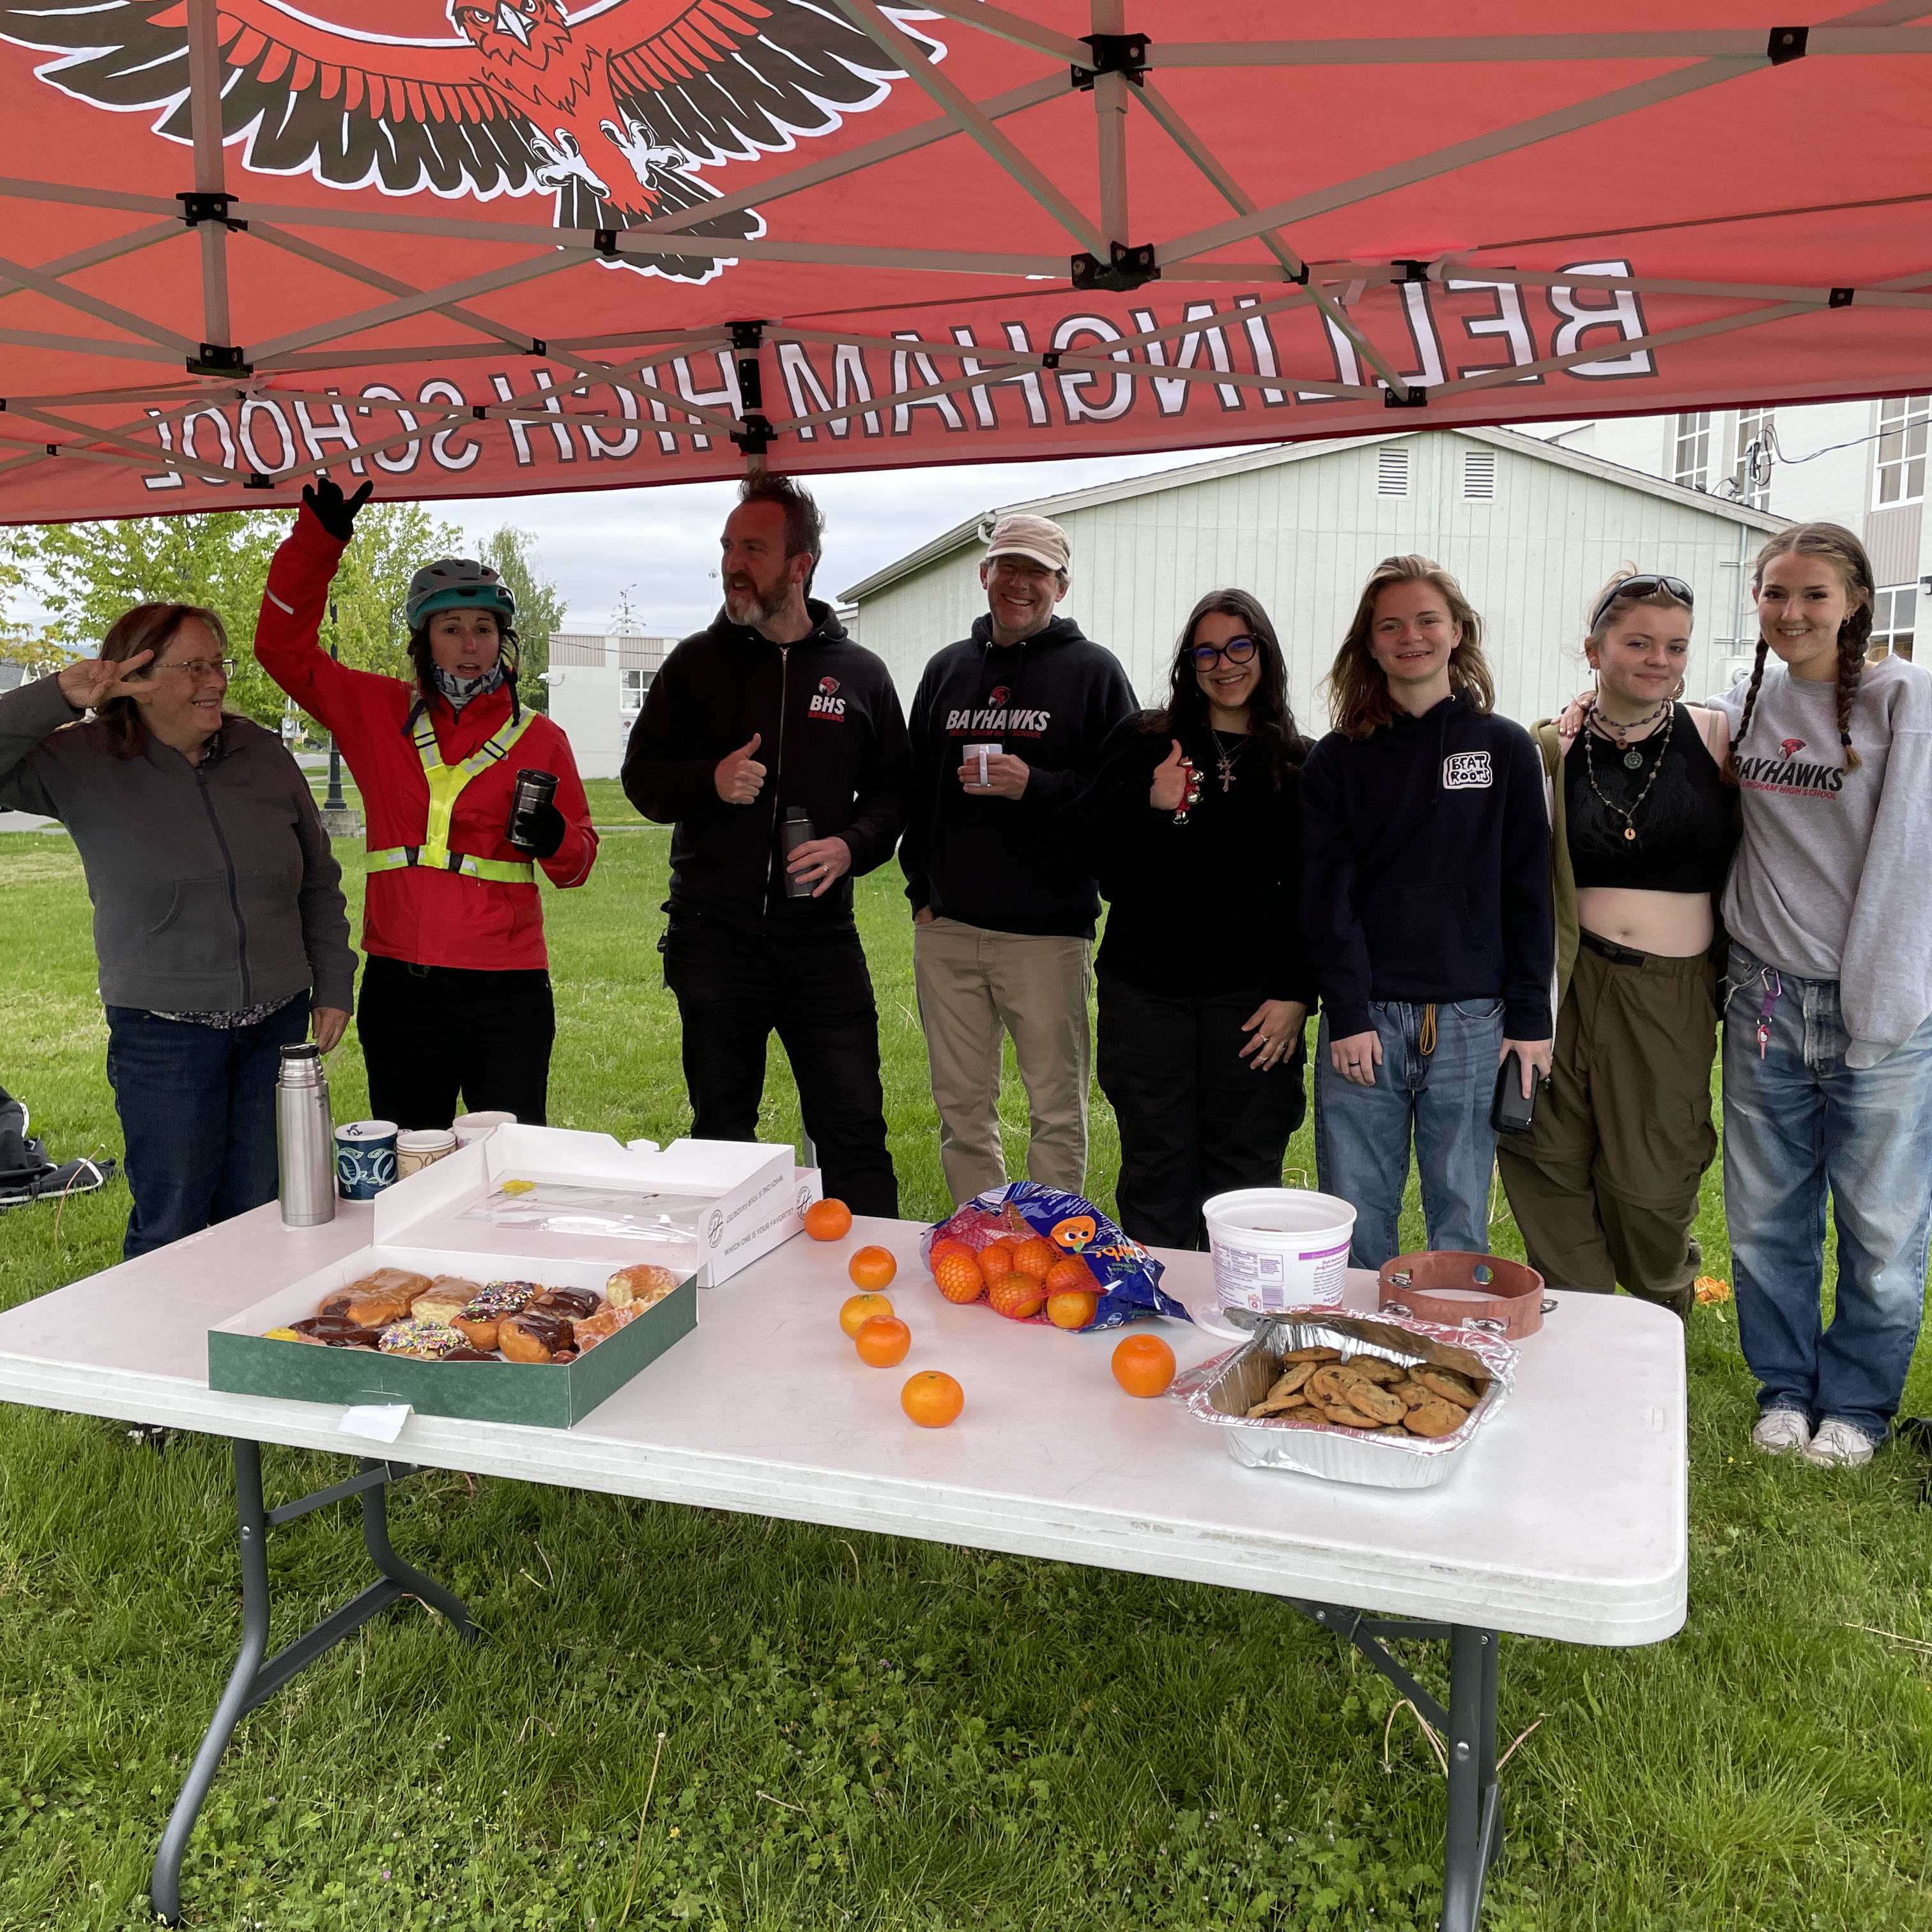 Several adults and high school students standing under a red tent behind a table with donuts and oranges